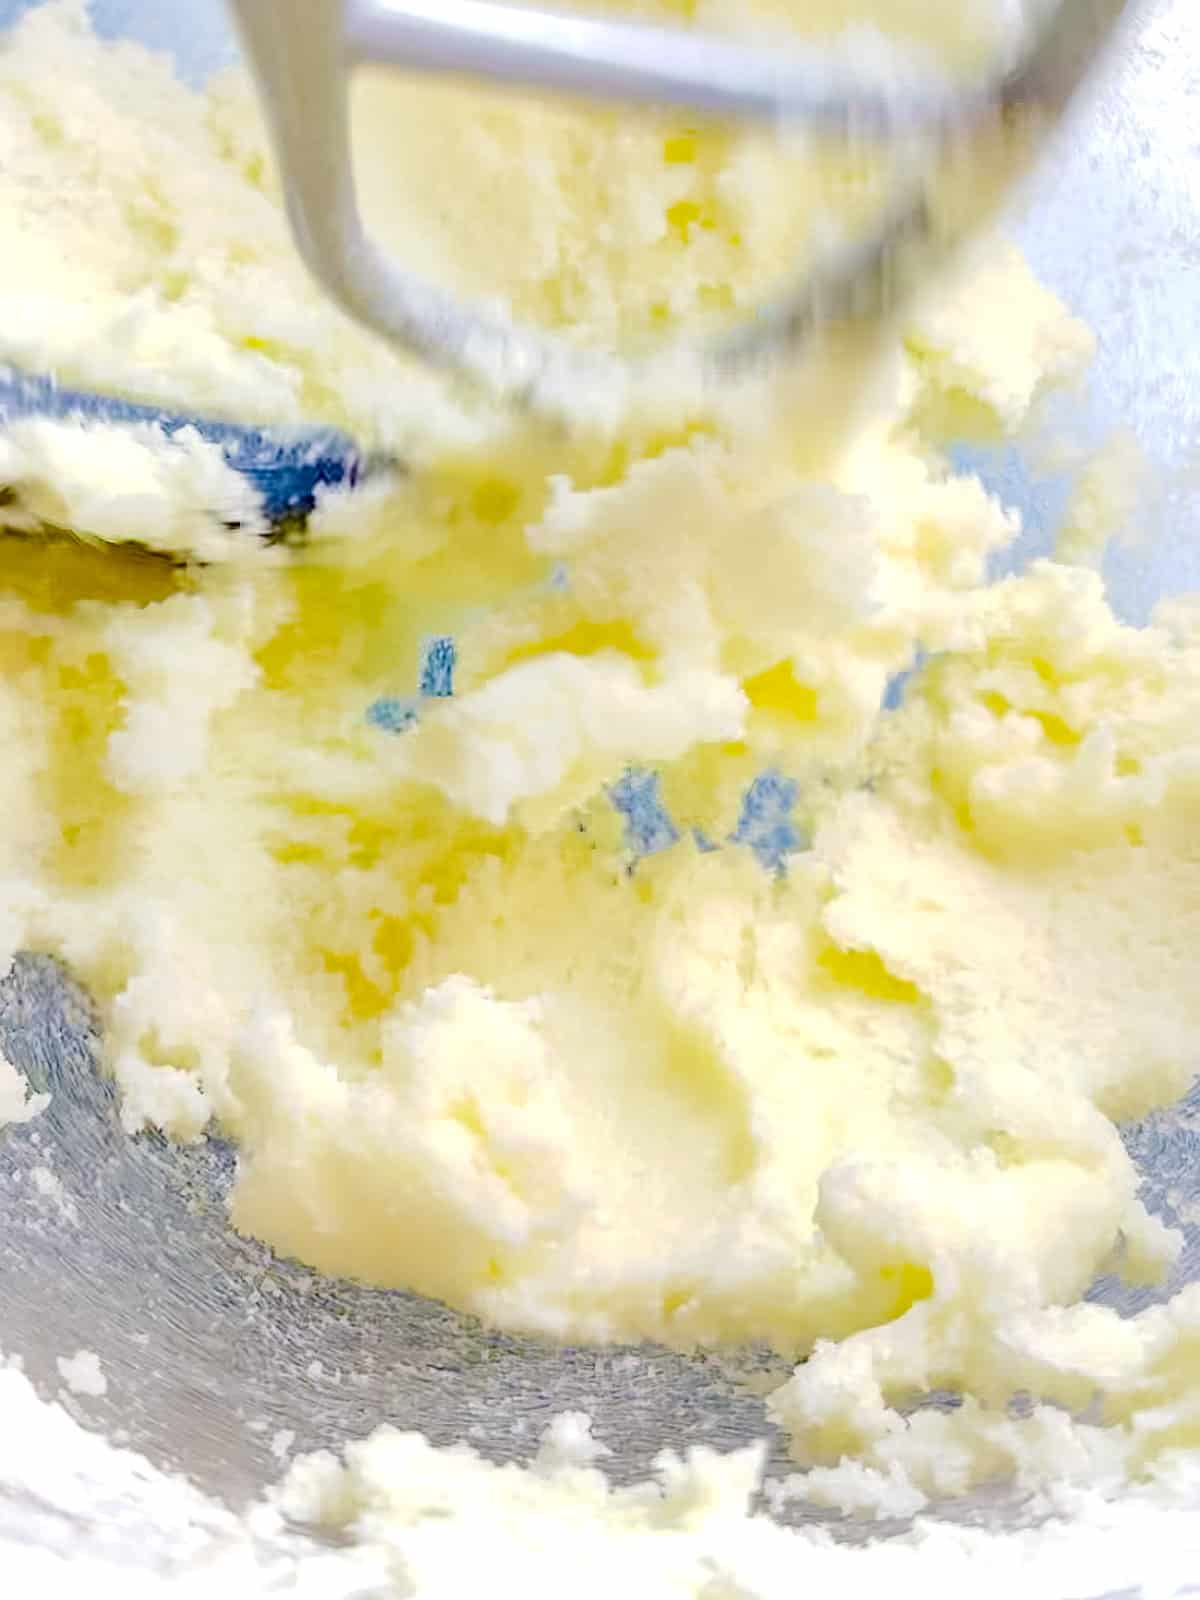 Creaming butter and sugar in a stand mixer.